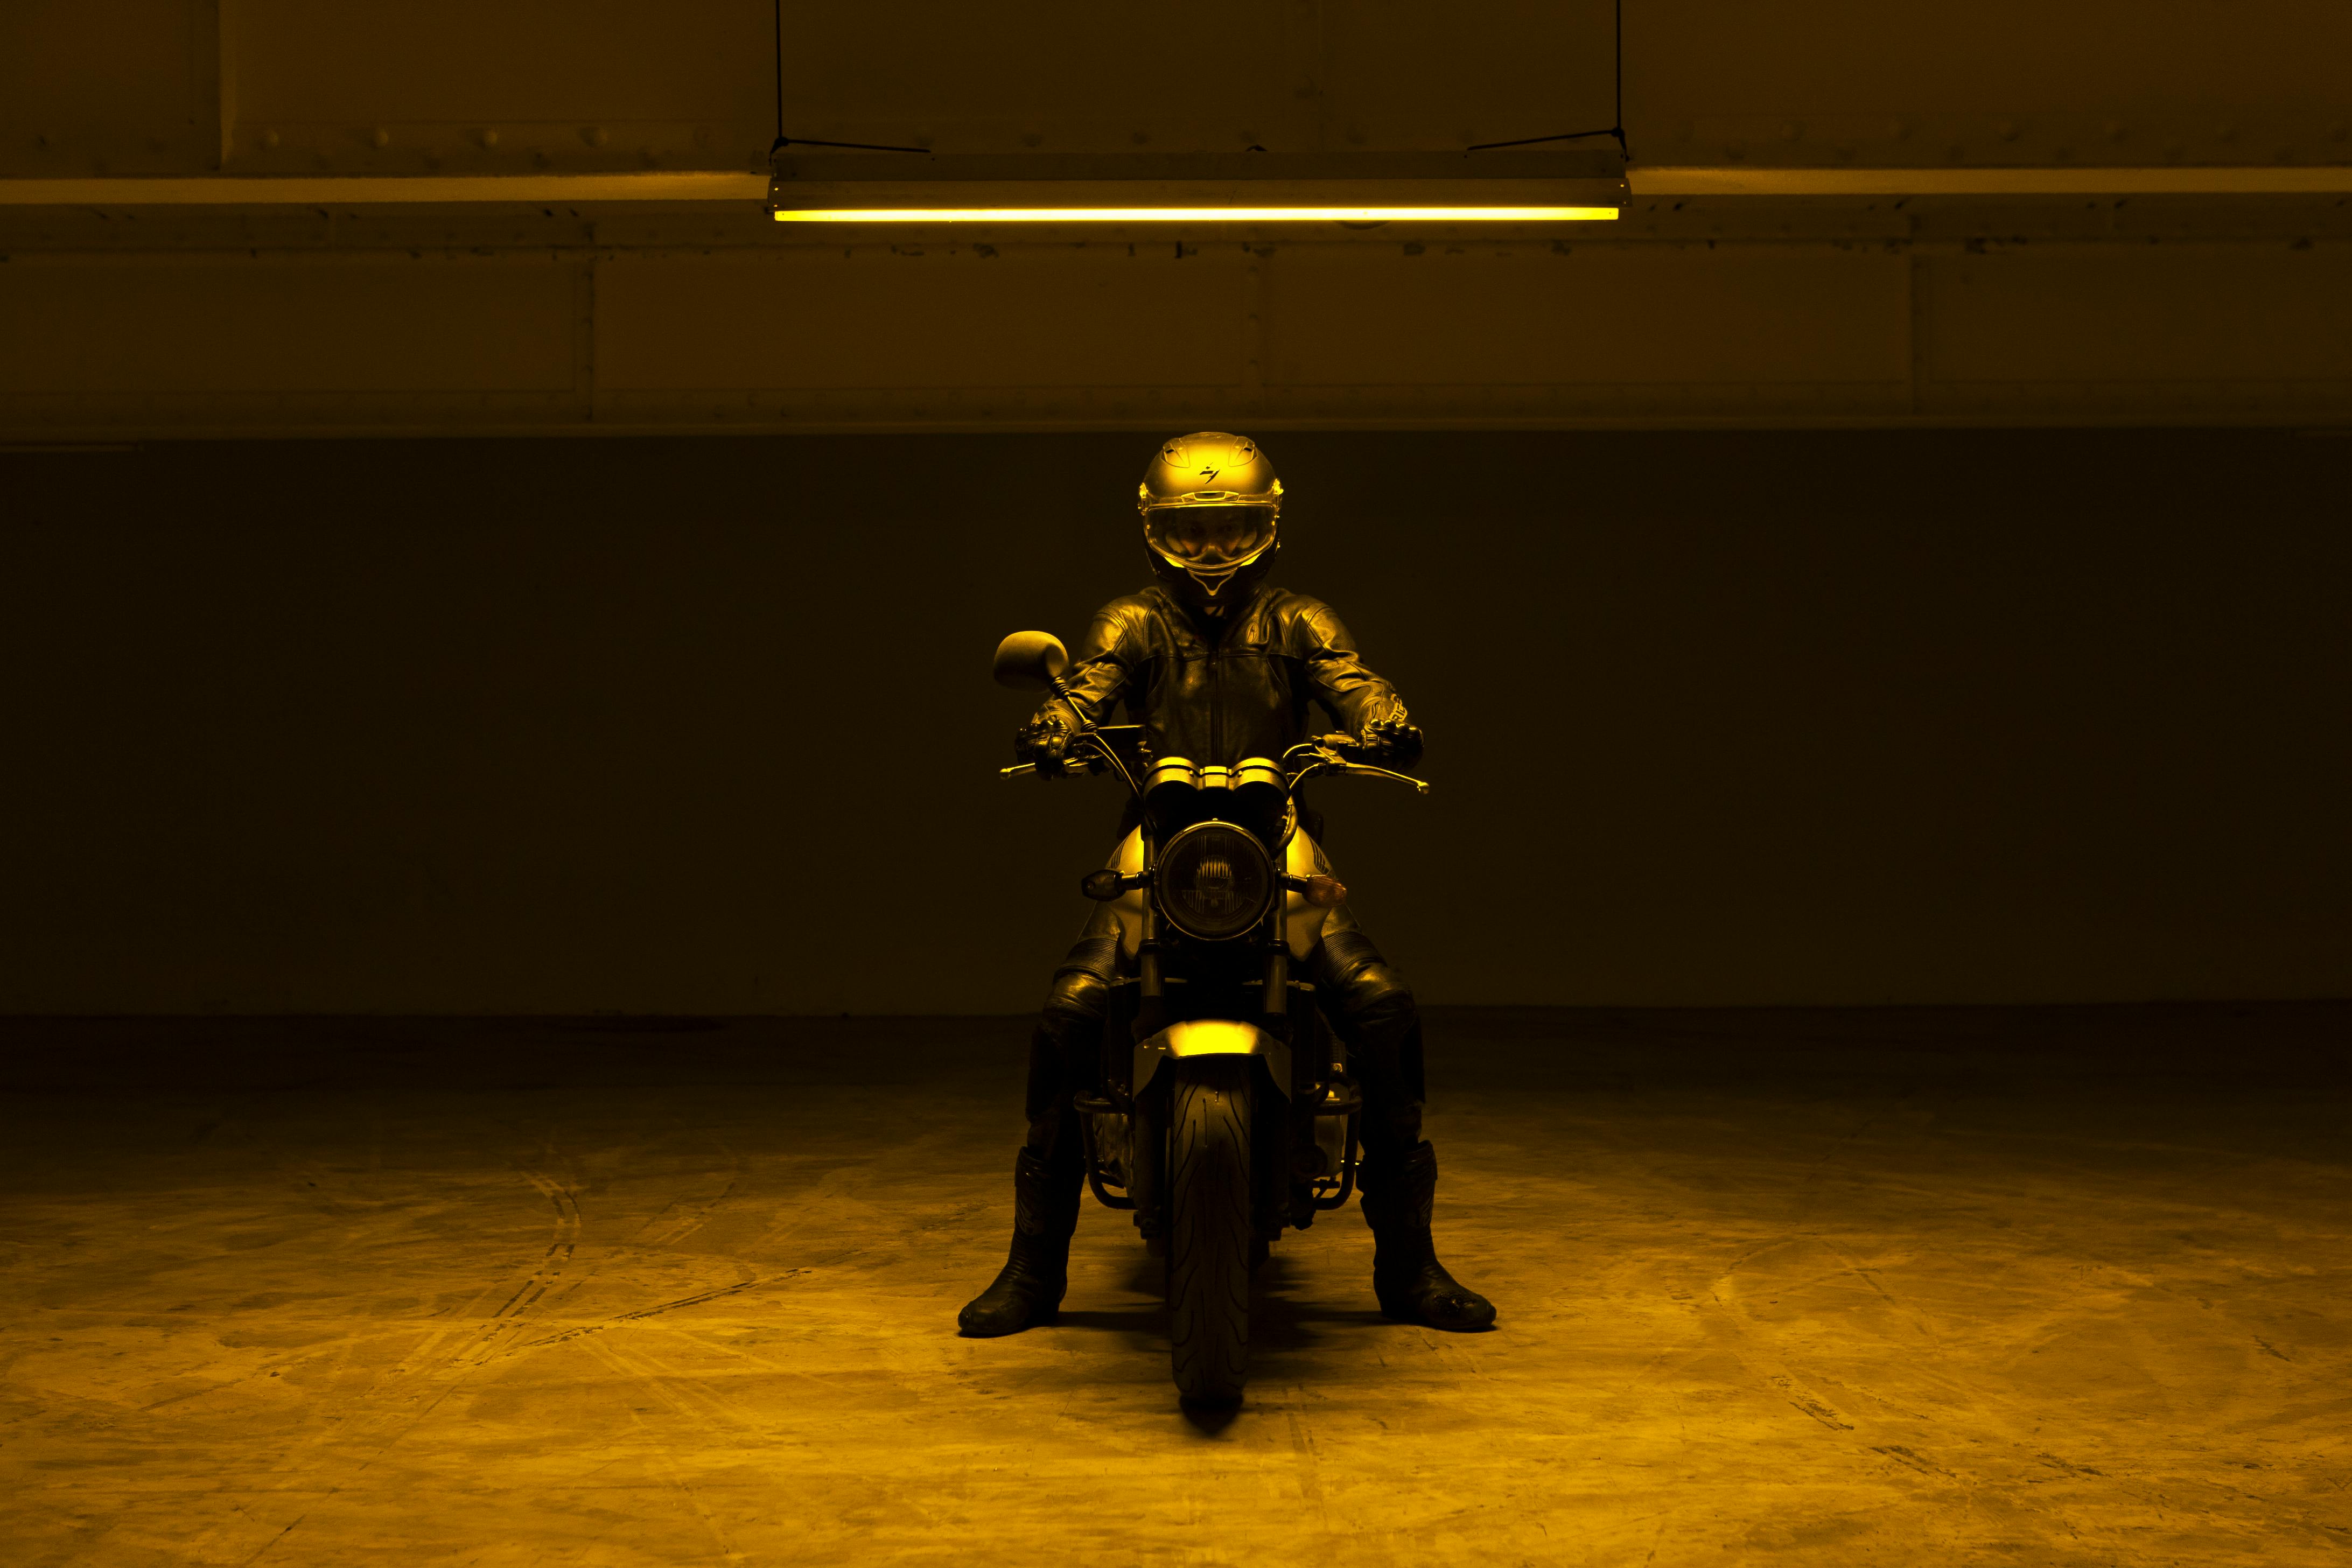 A motorcyclist wearing a full-face helmet is dressed in black on a motorbike in the middle of a garage